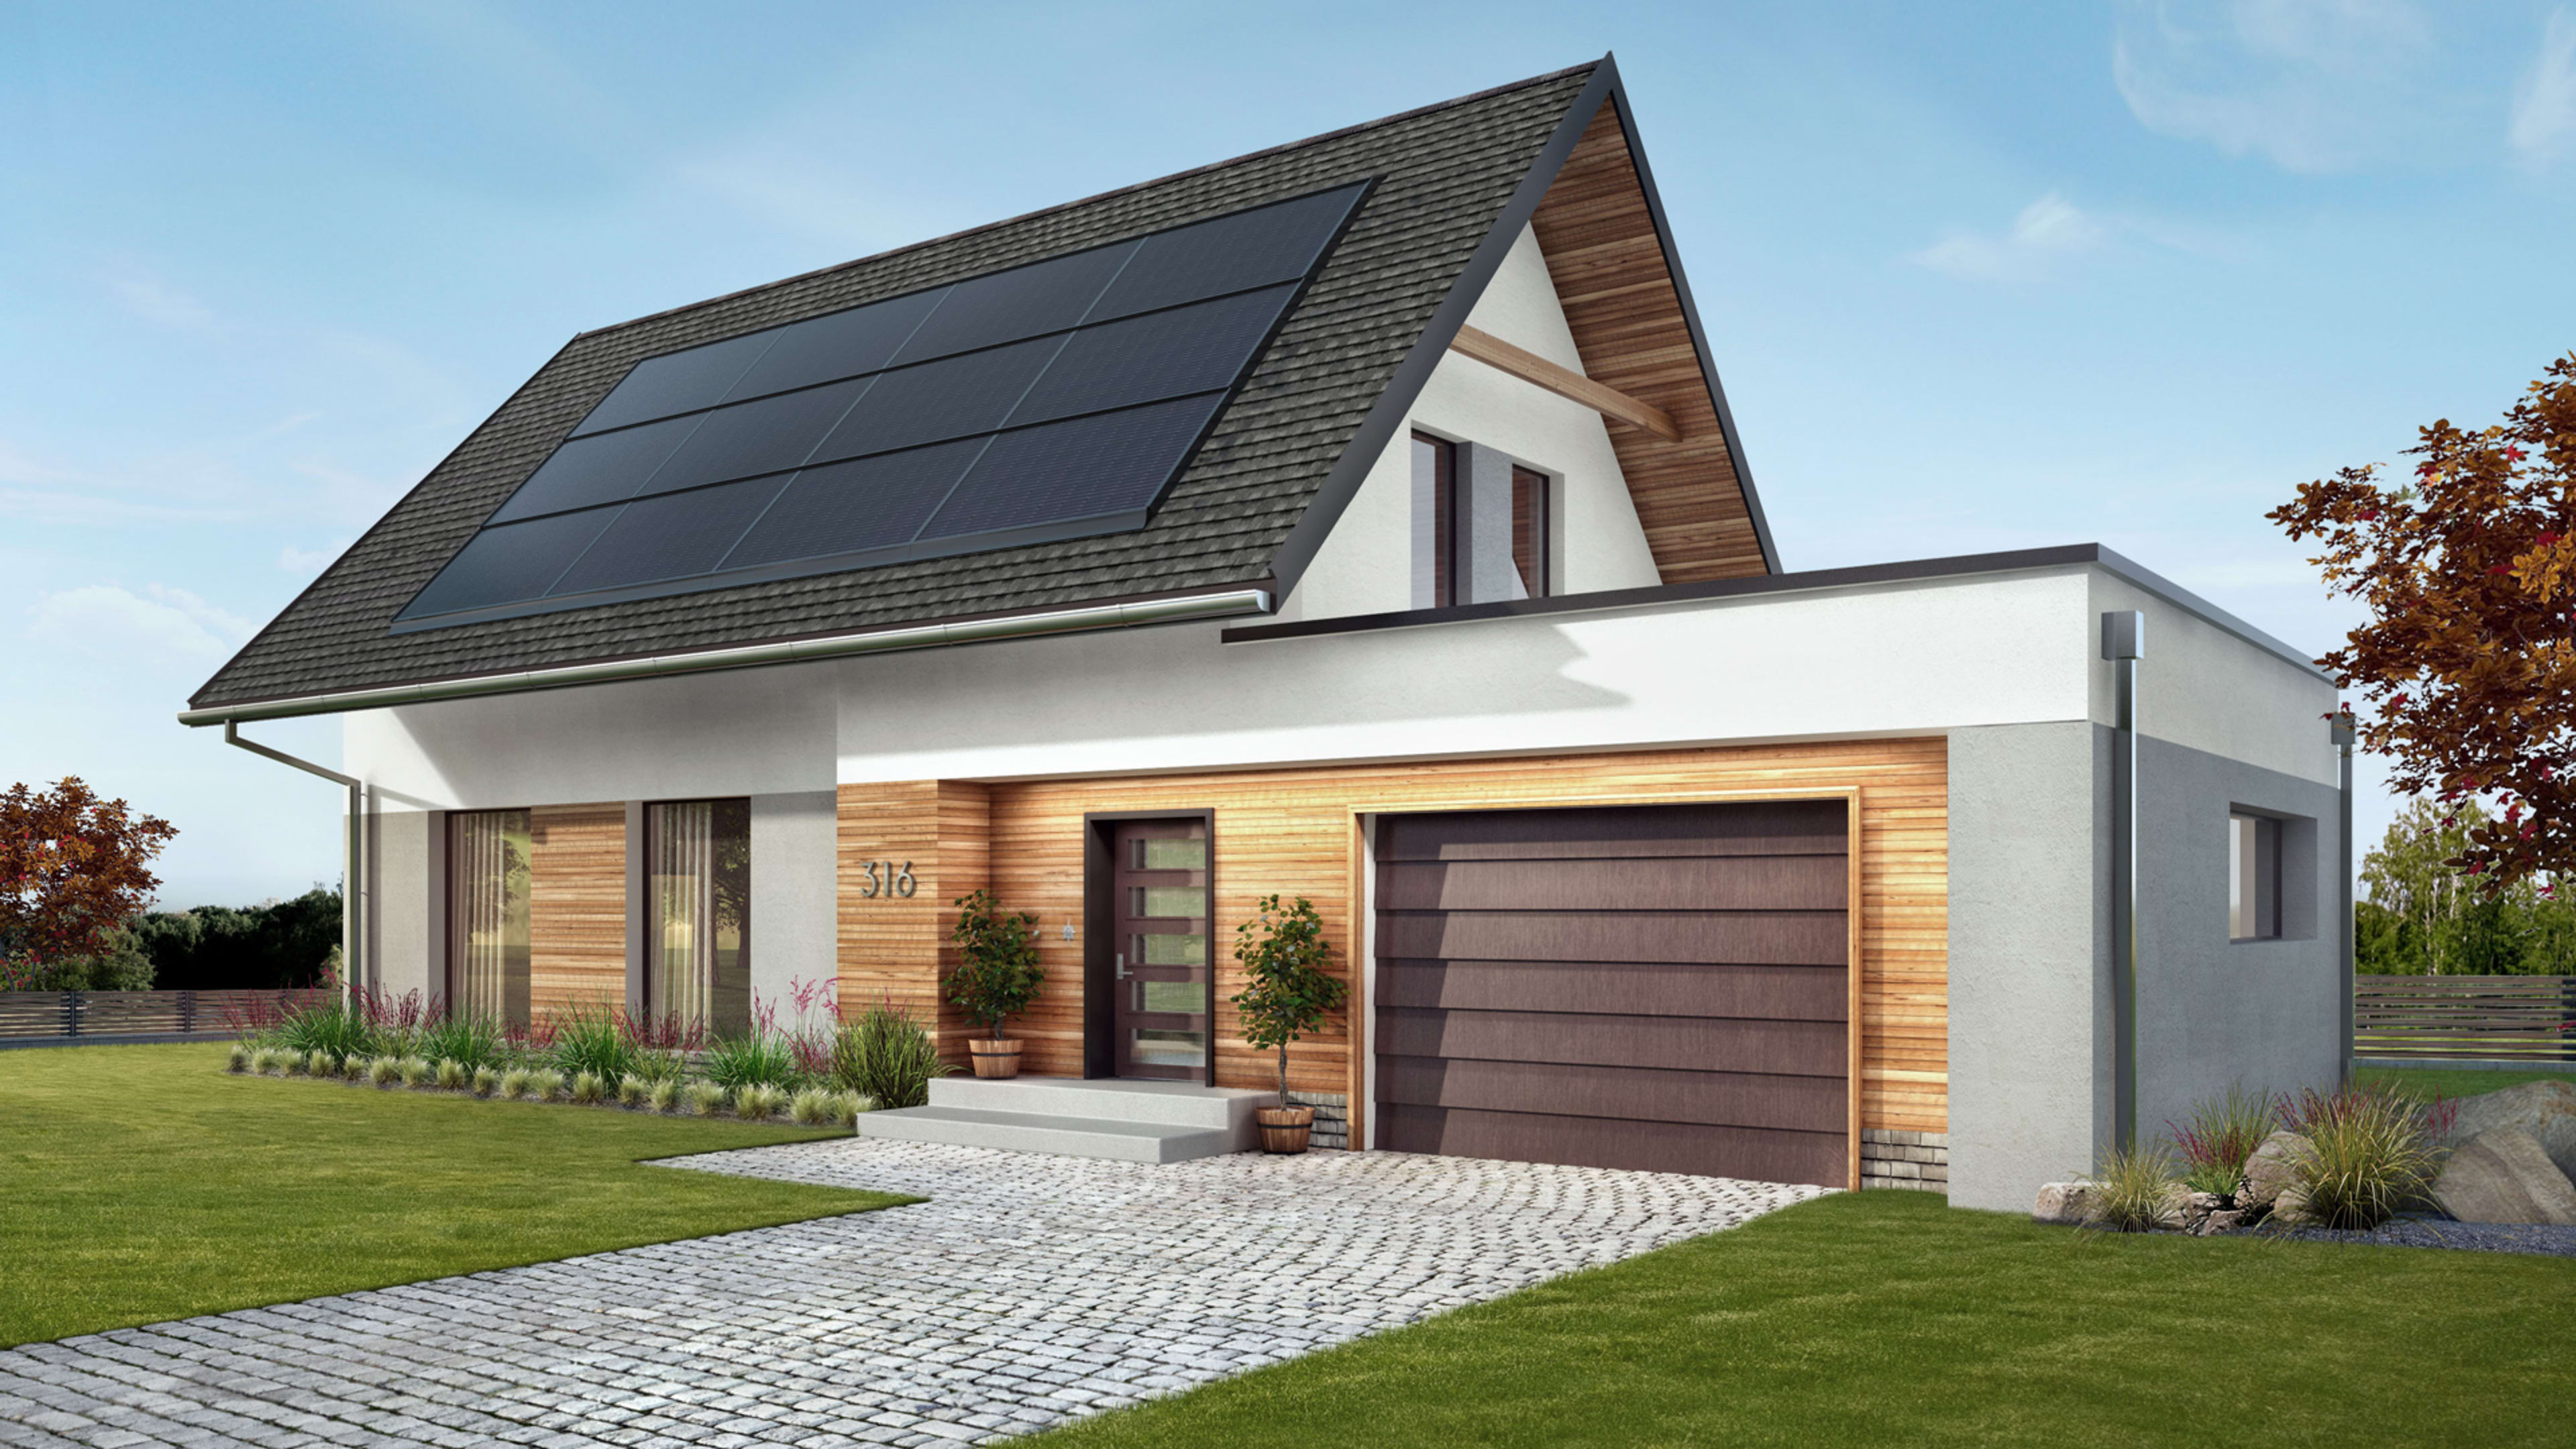 The world’s largest roofing company just launched a new solar startup